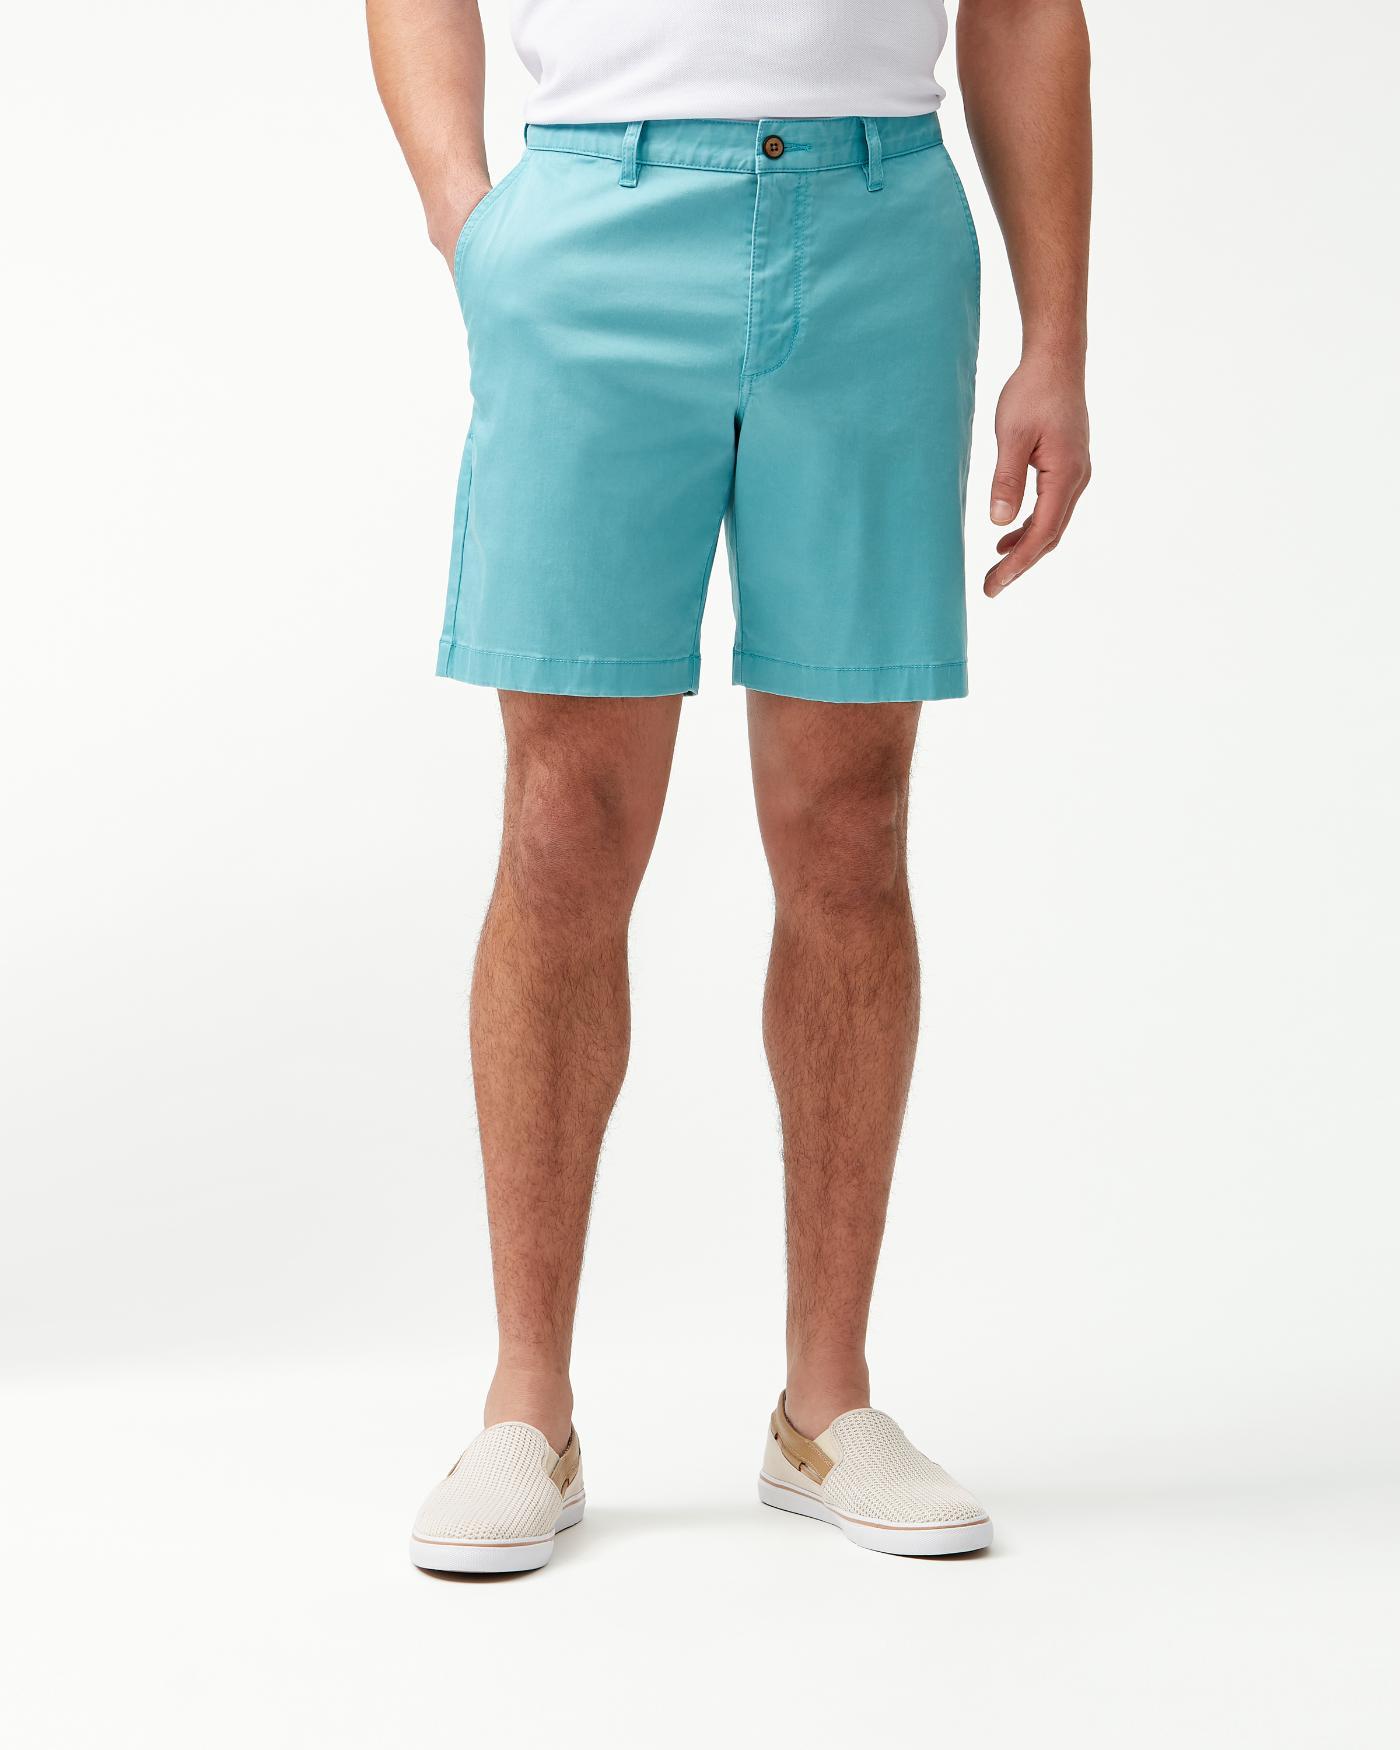 Tommy Bahama Cotton Boracay 8-inch Chino Shorts in Blue for Men - Lyst